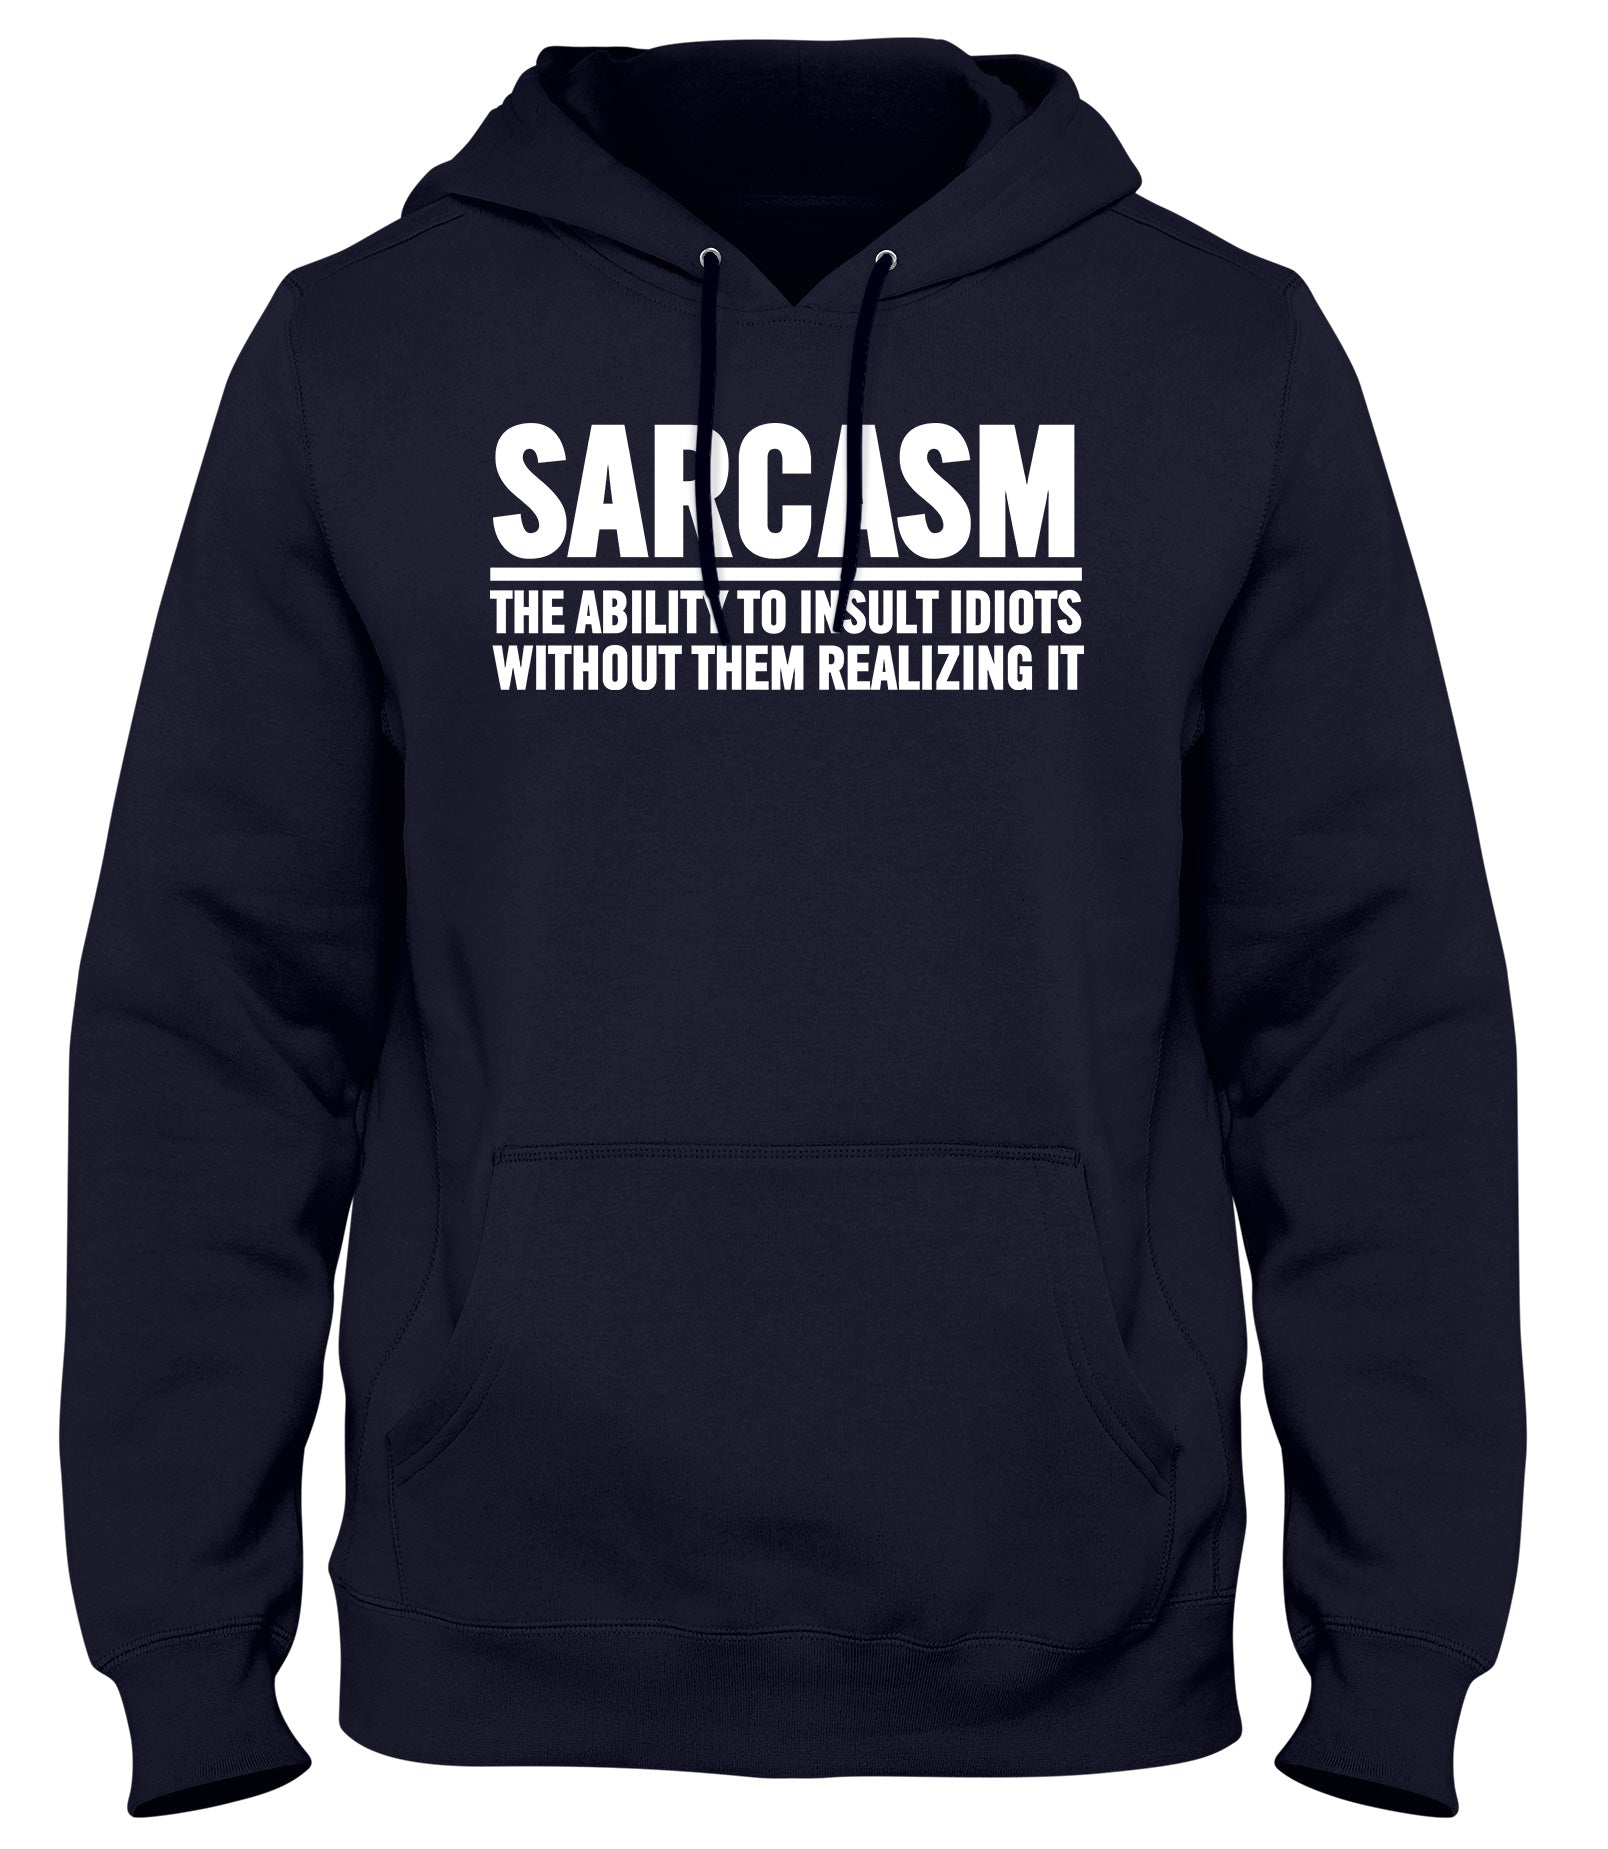 SARCASM THE ABILITY TO INSULT IDIOTS WITHOUT THEM REALIZING IT WOMENS LADIES MENS UNISEX HOODIE